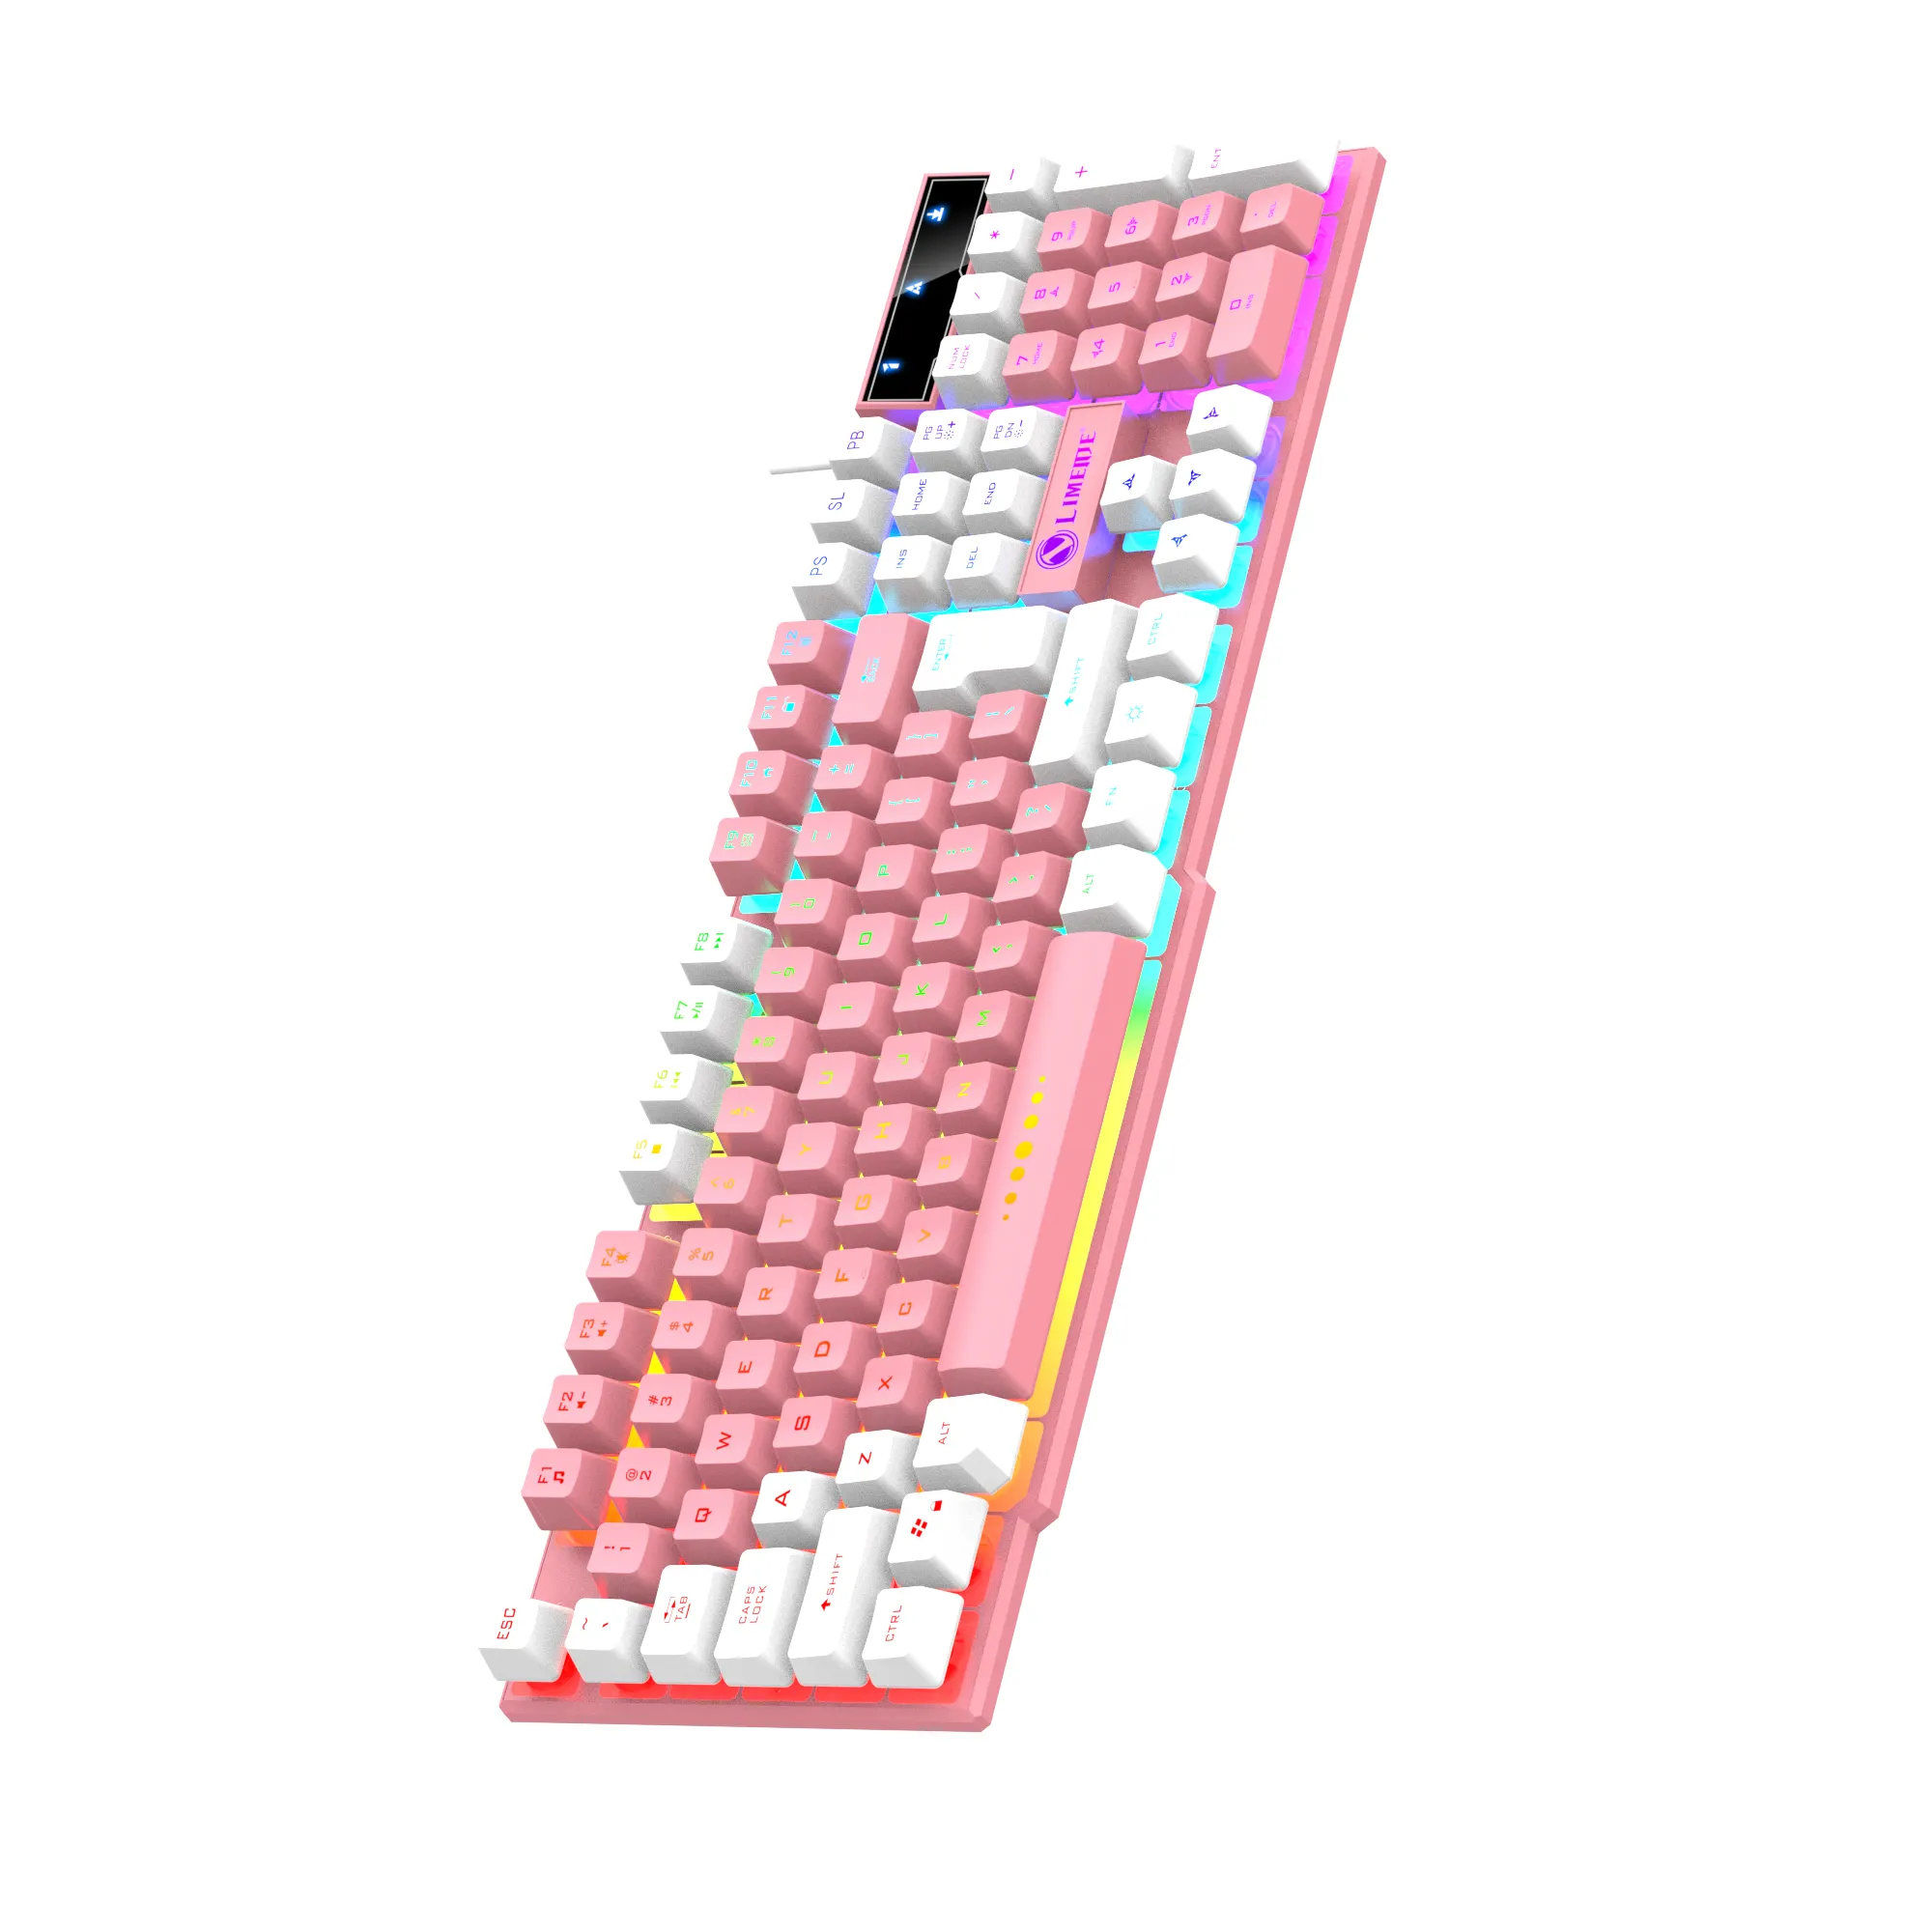 Hotselling fashionable backlit colorful wired gaming keyboard